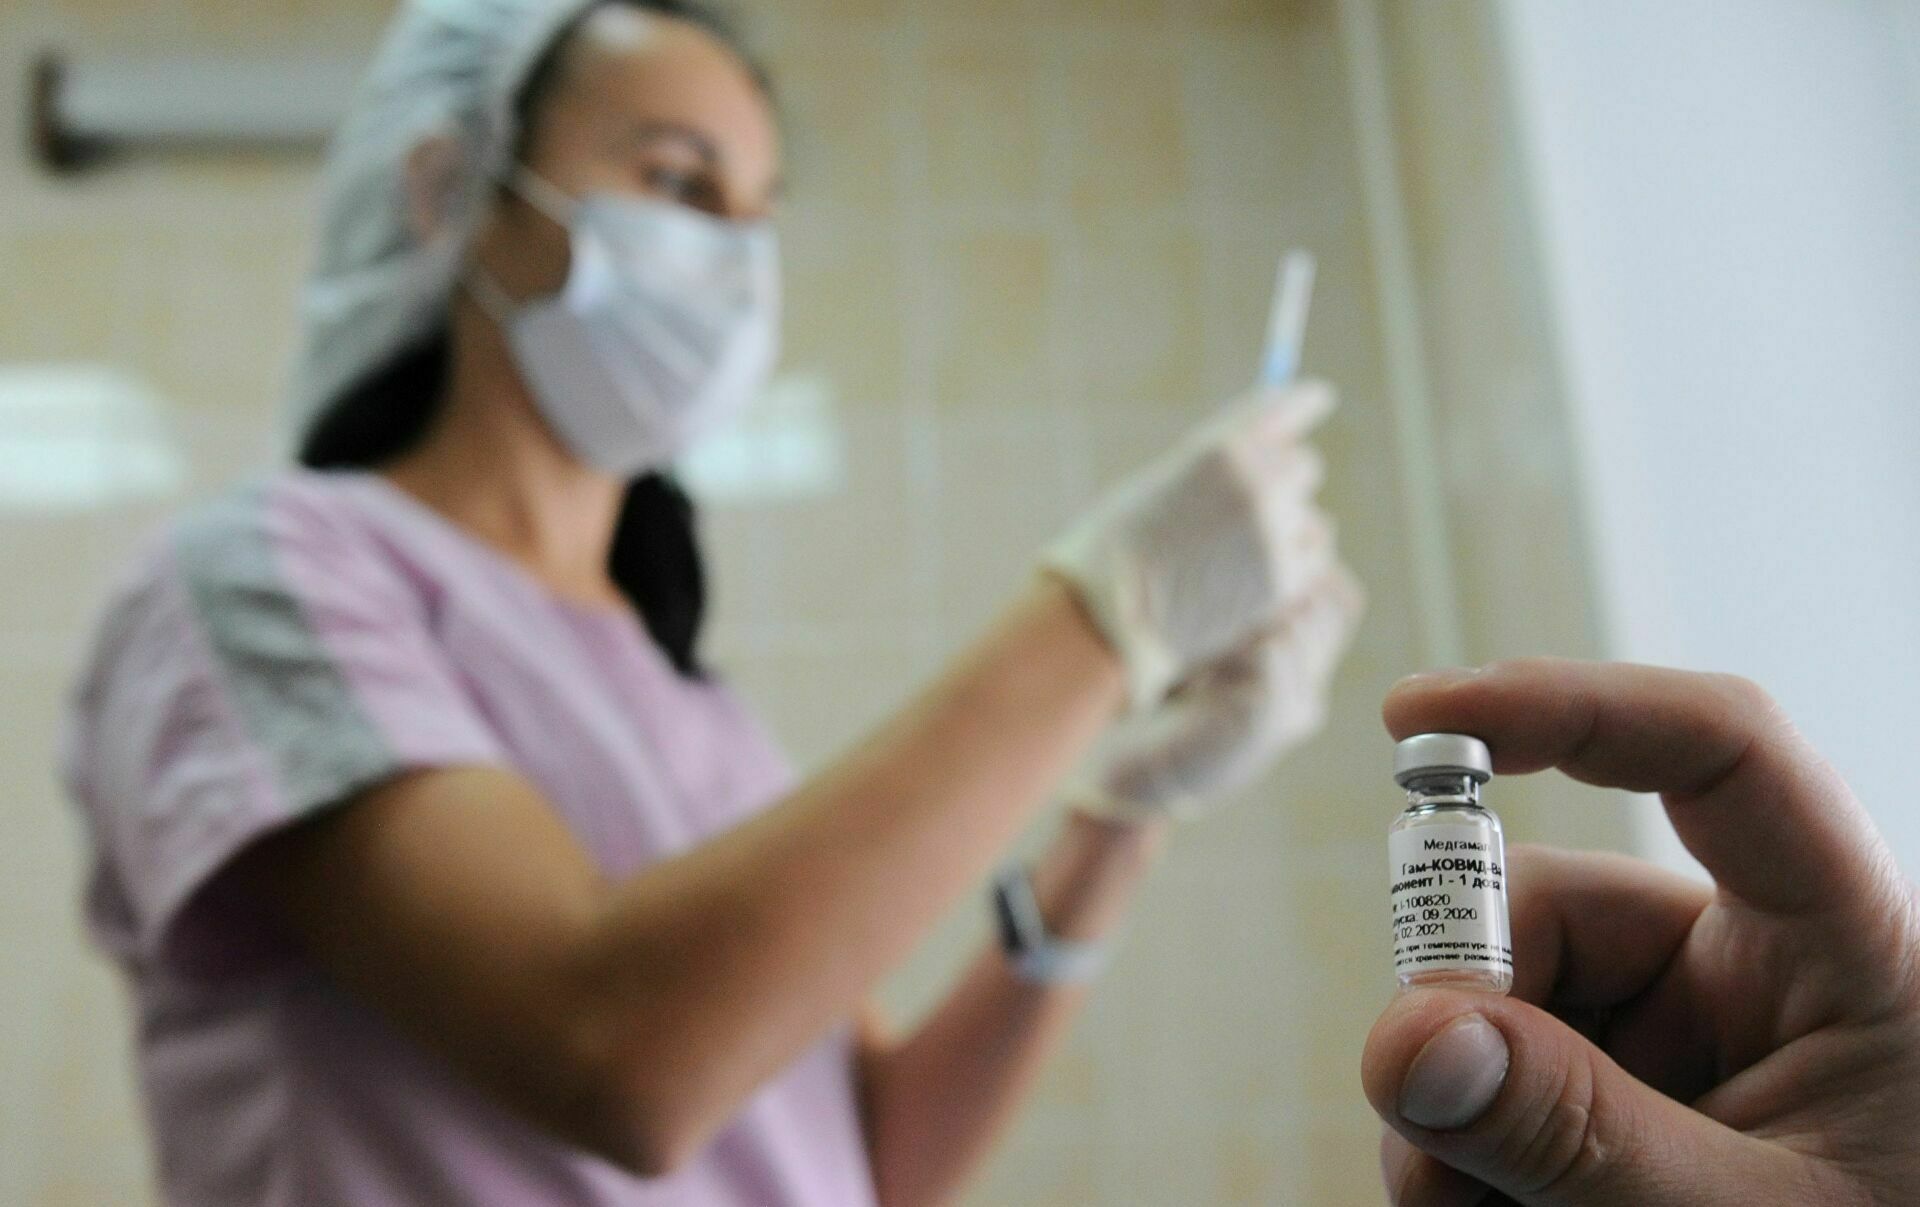 50% of people vaccinated against covid were revaccinated in Moscow